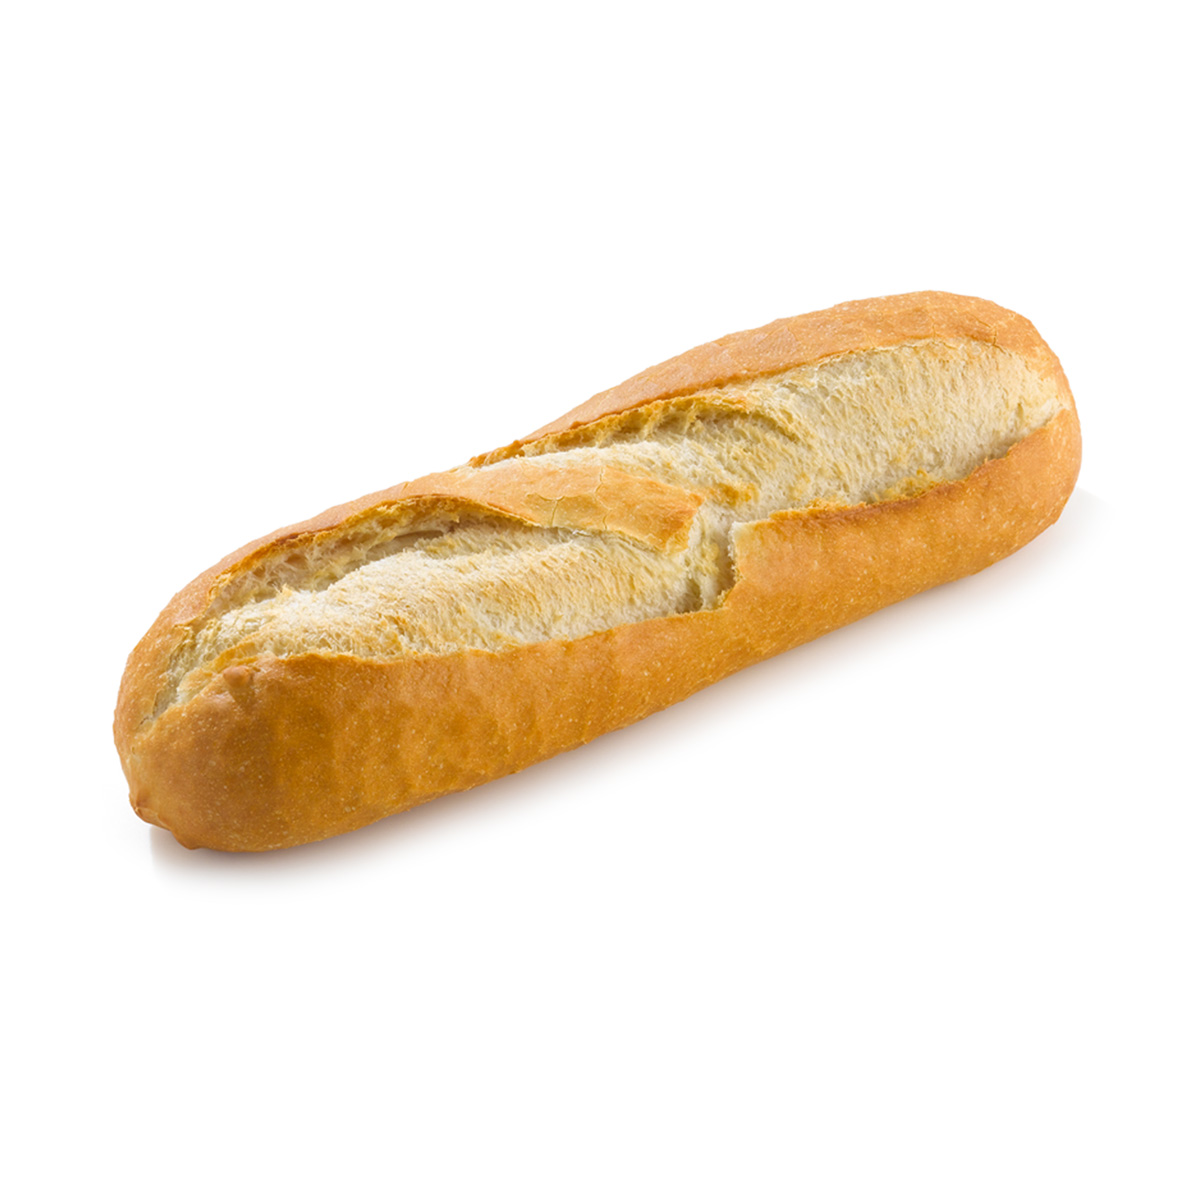 Molco 1/2 Baguette wit, breed (± 28 cm)